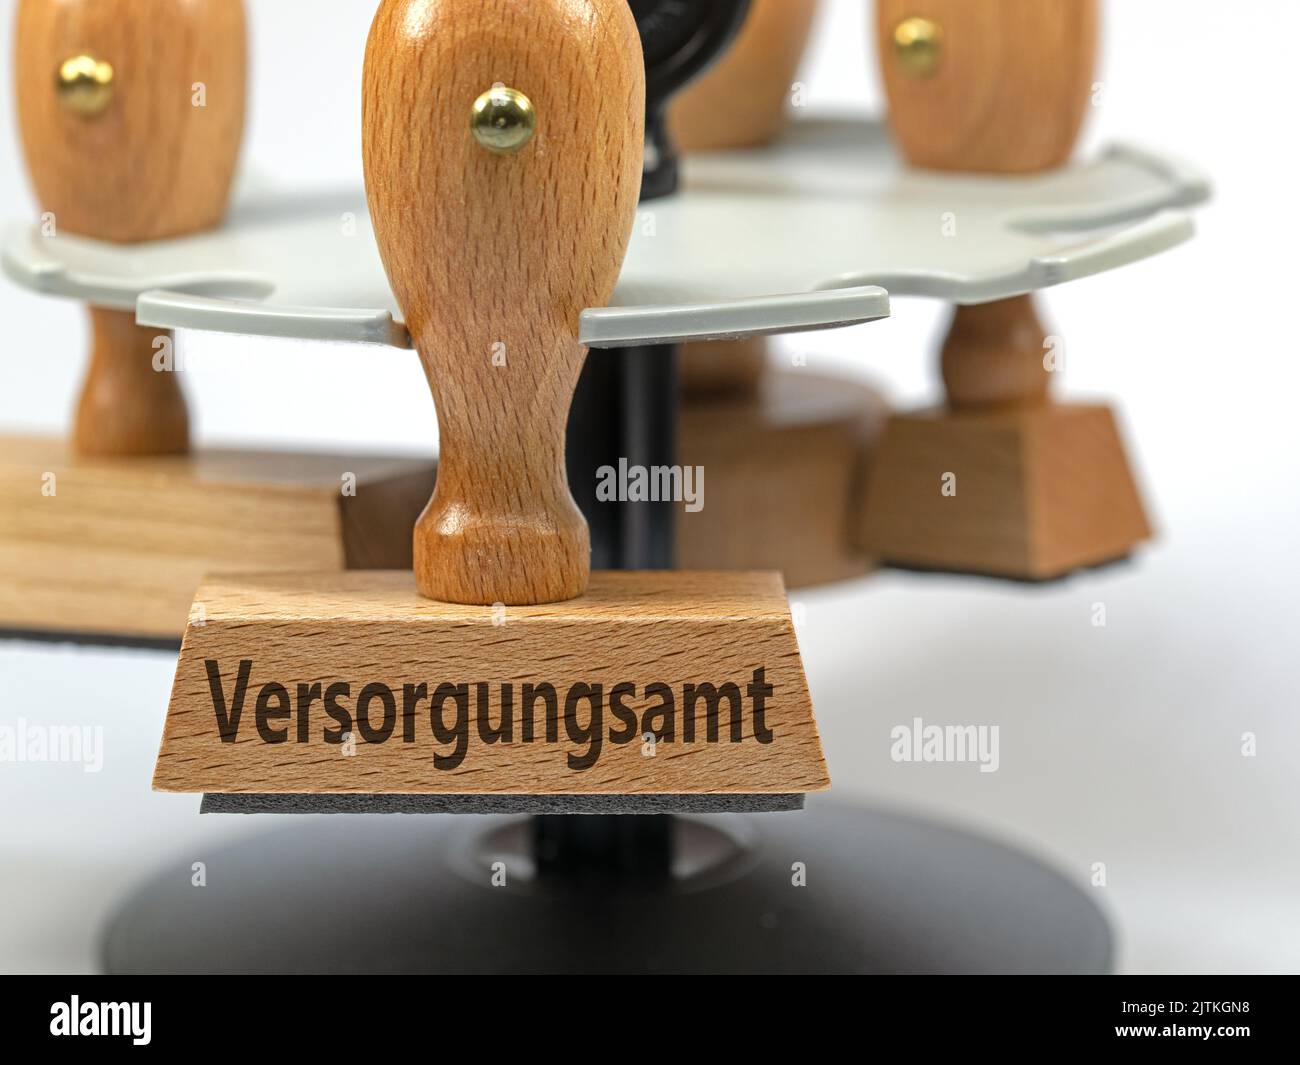 Wooden stamp with the imprint 'Versorgungsamt', translation 'Pension Office' Stock Photo